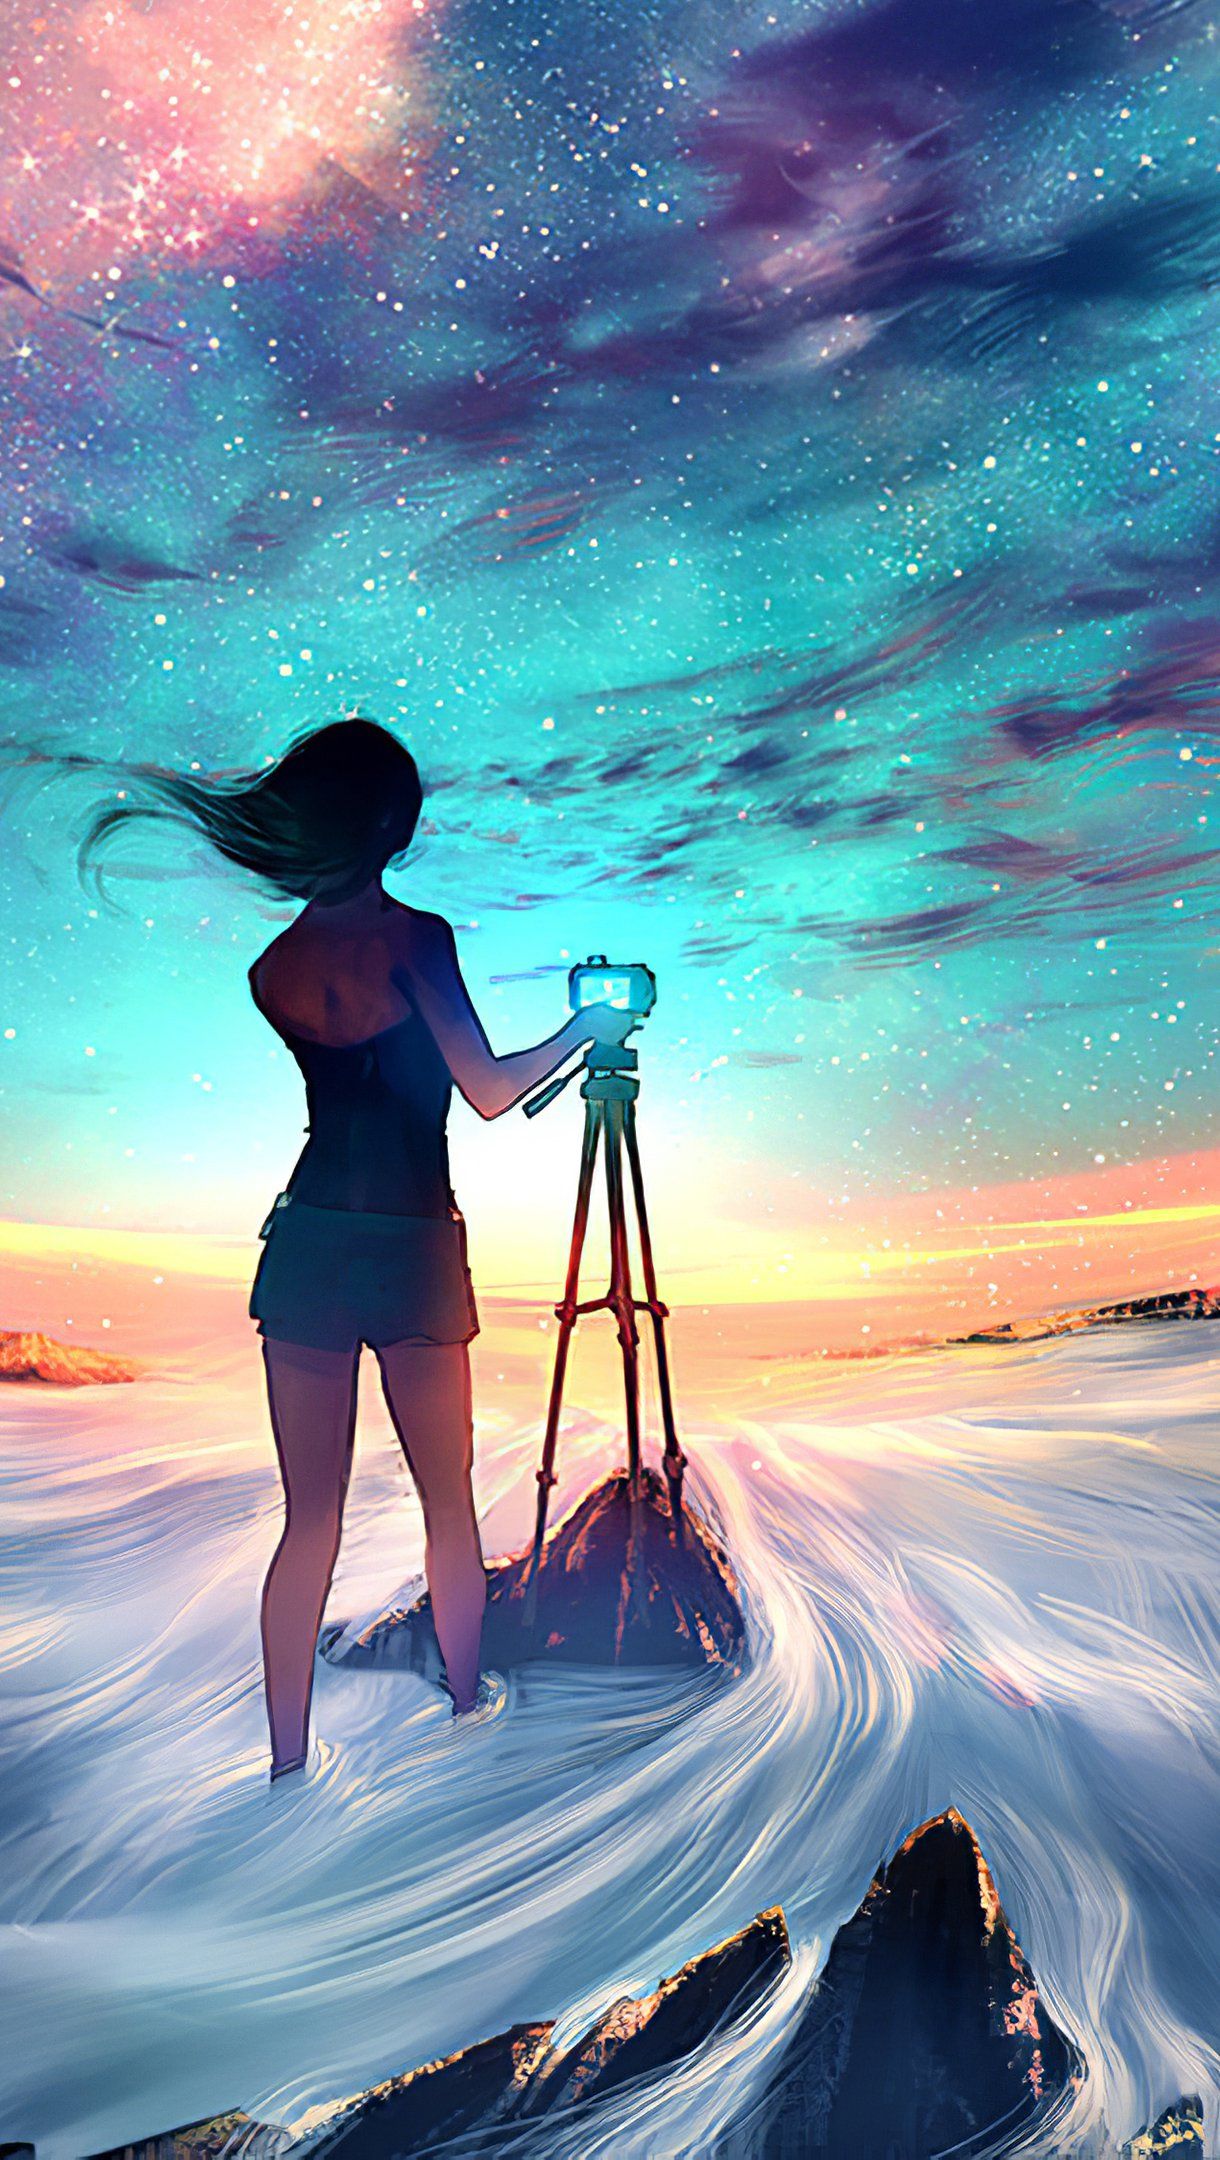 Girl taking a picture of the sky Wallpaper 4k Ultra HD